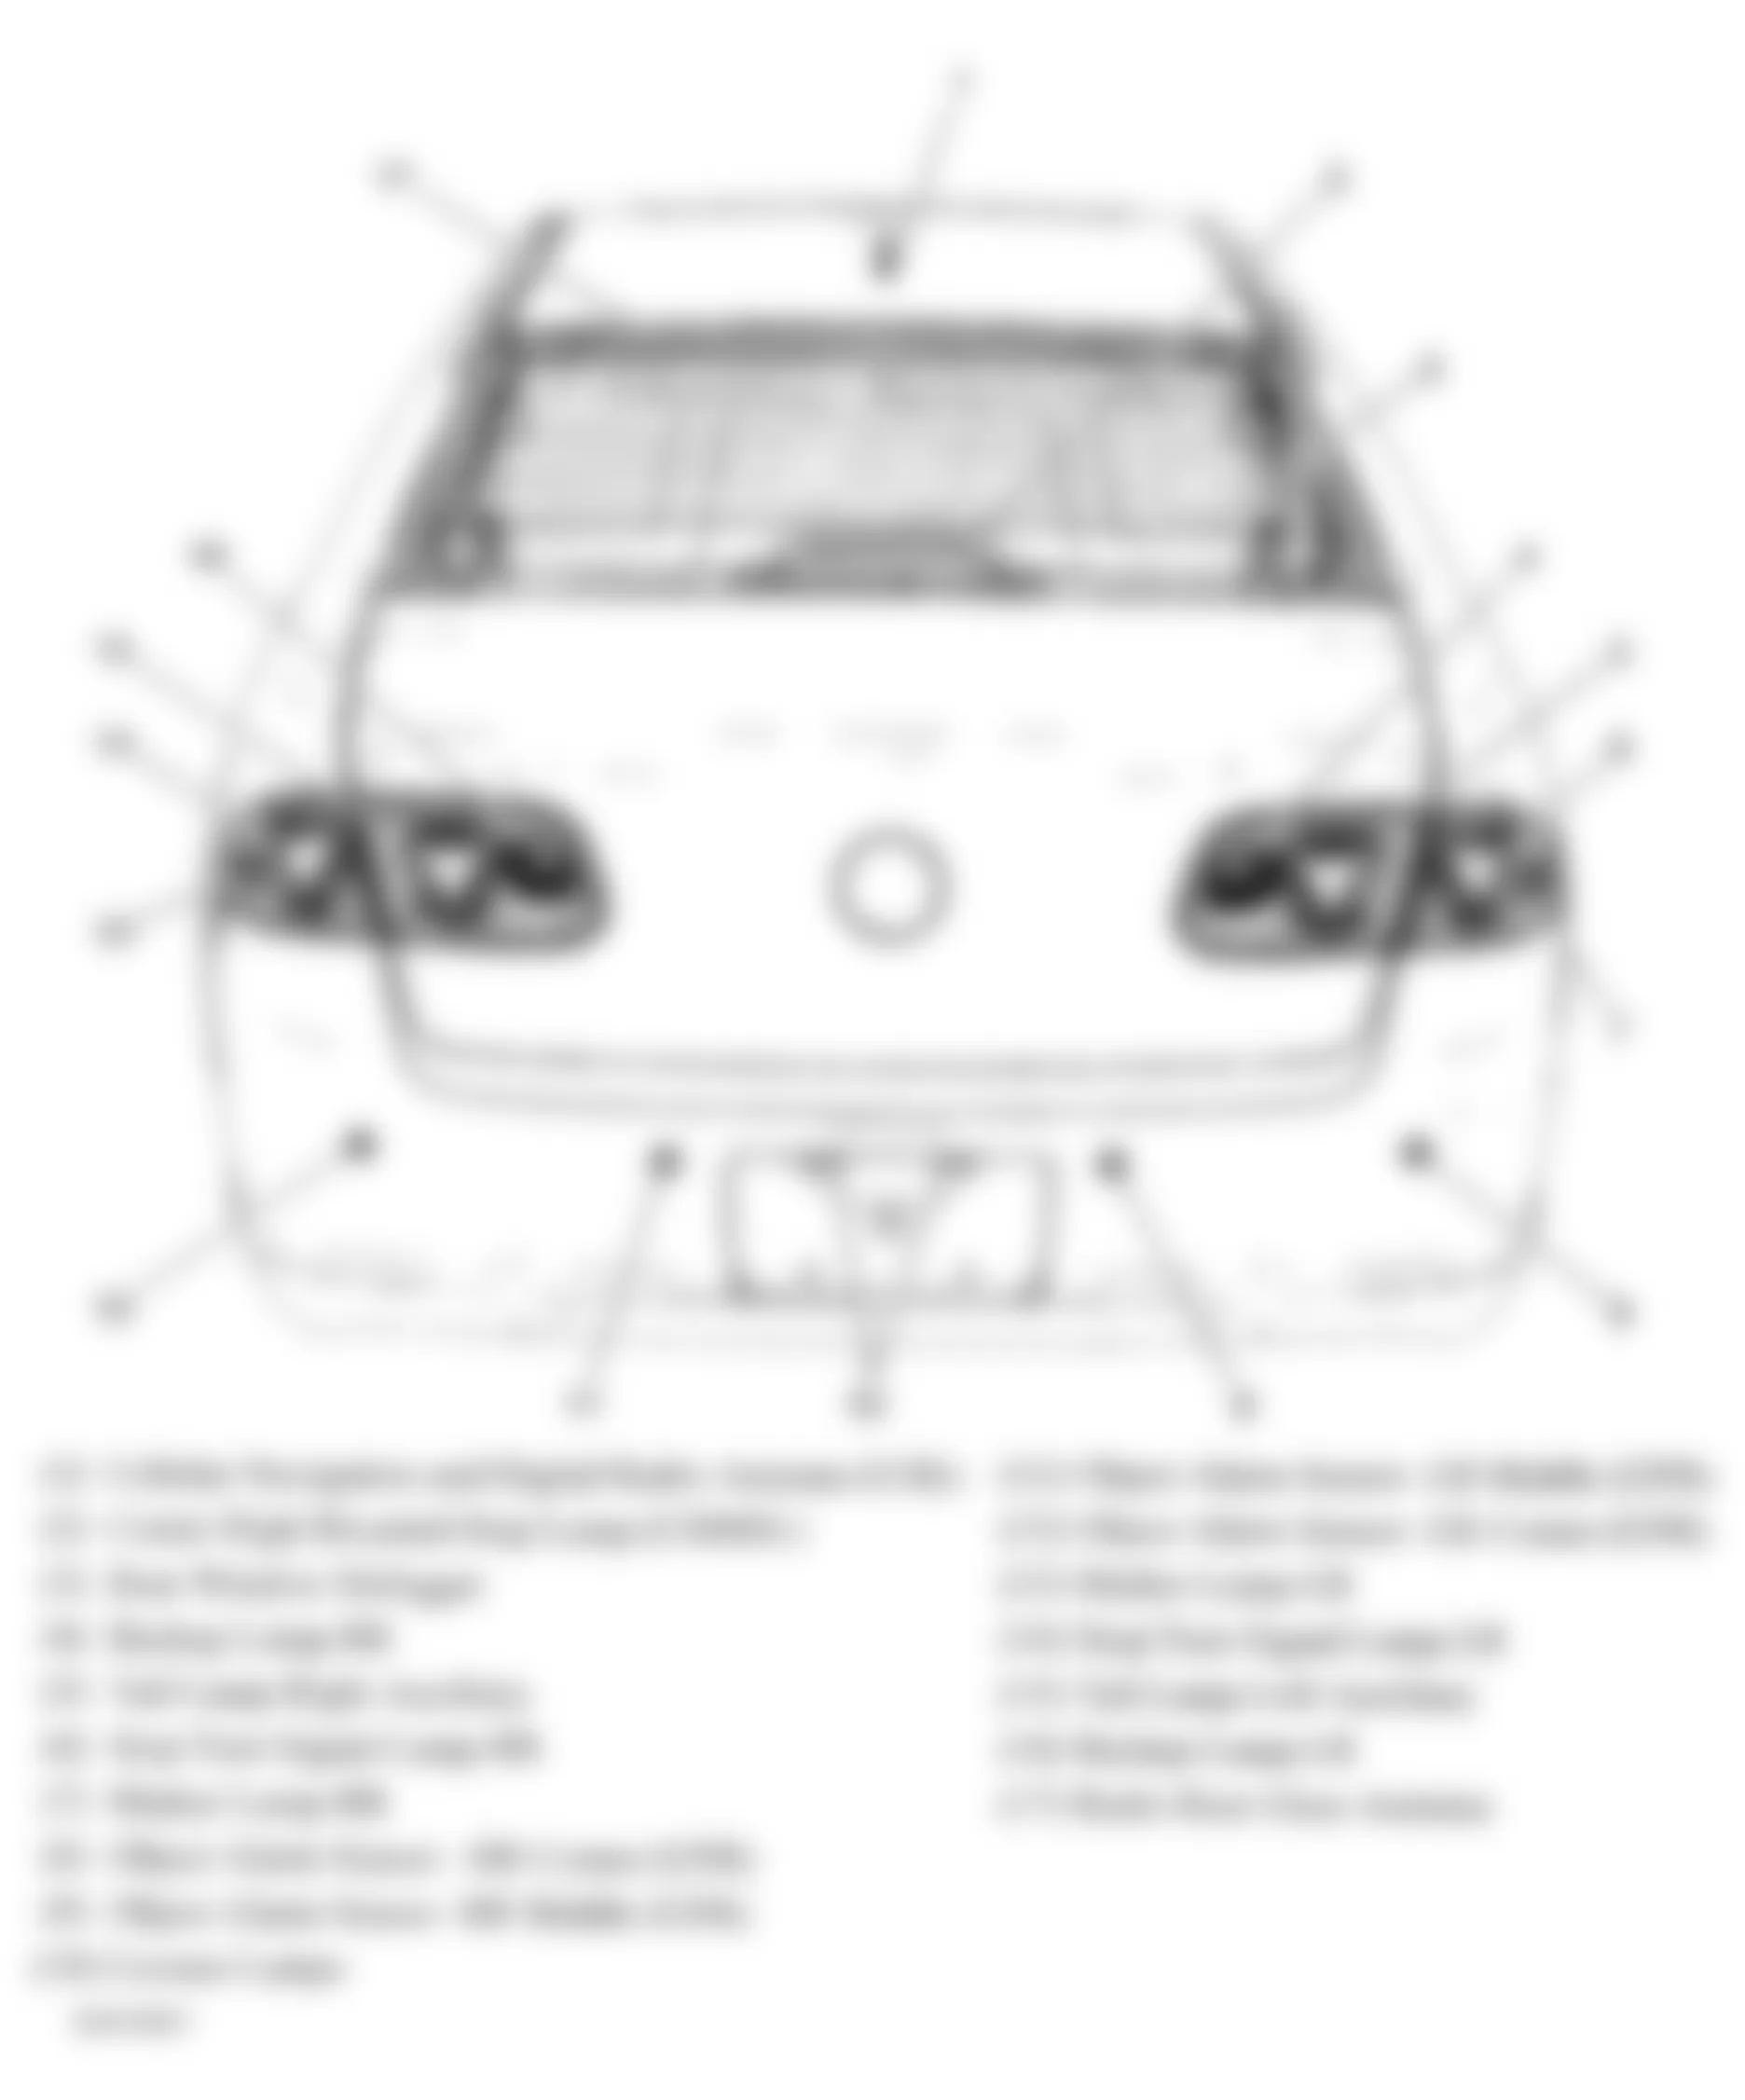 Buick Lucerne CX 2006 - Component Locations -  Rear Of Vehicle